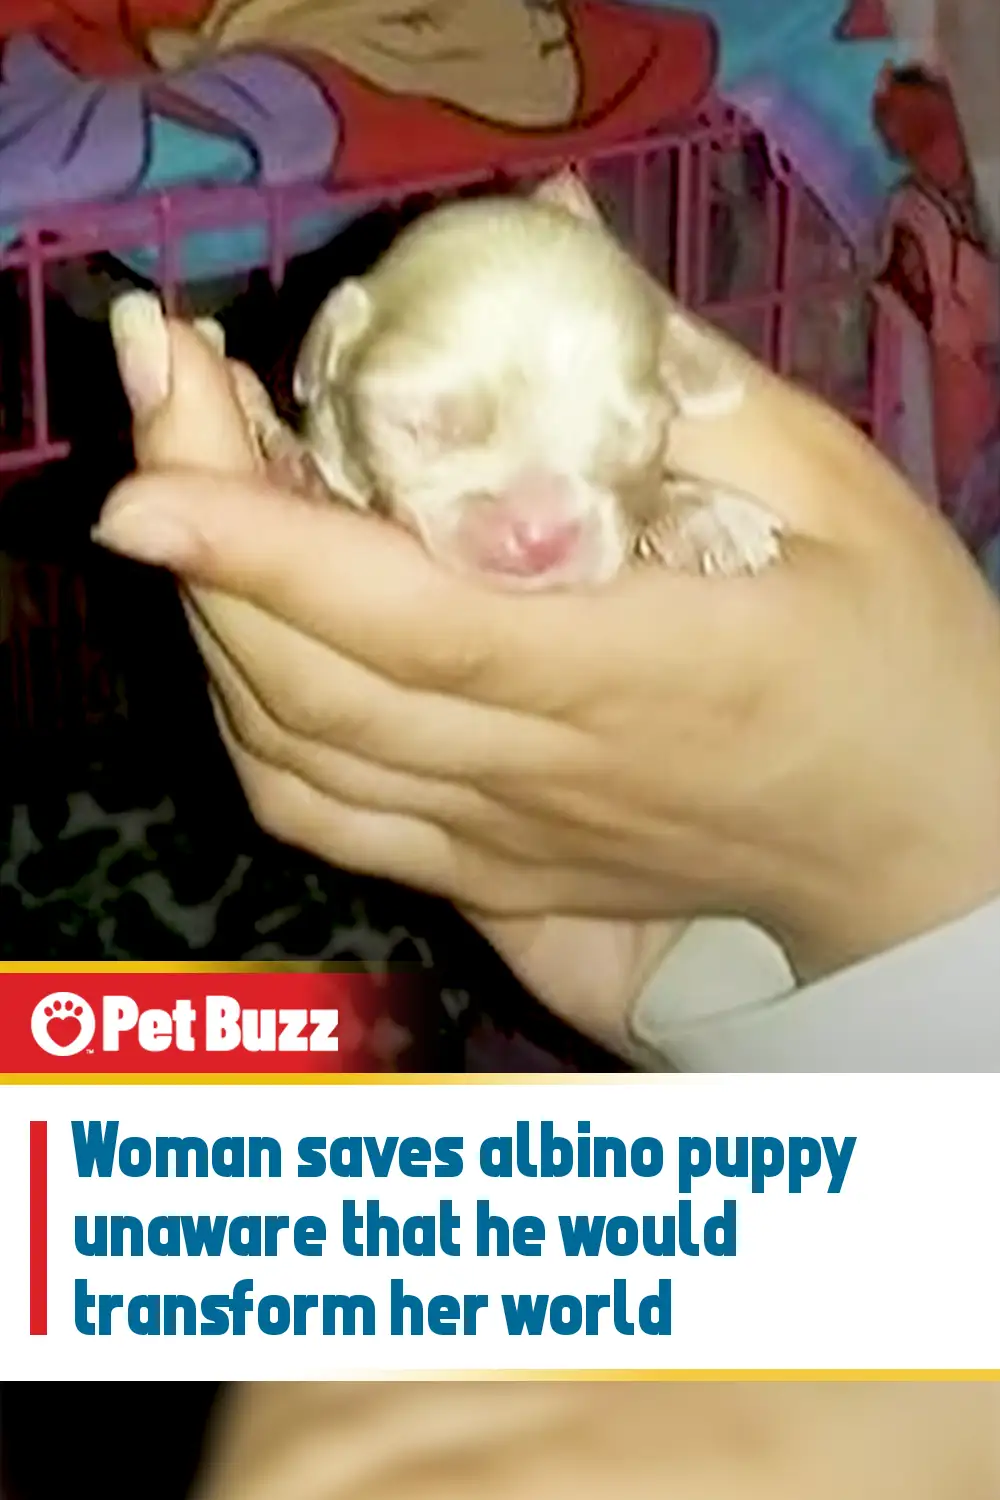 Woman saves albino puppy unaware that he would transform her world